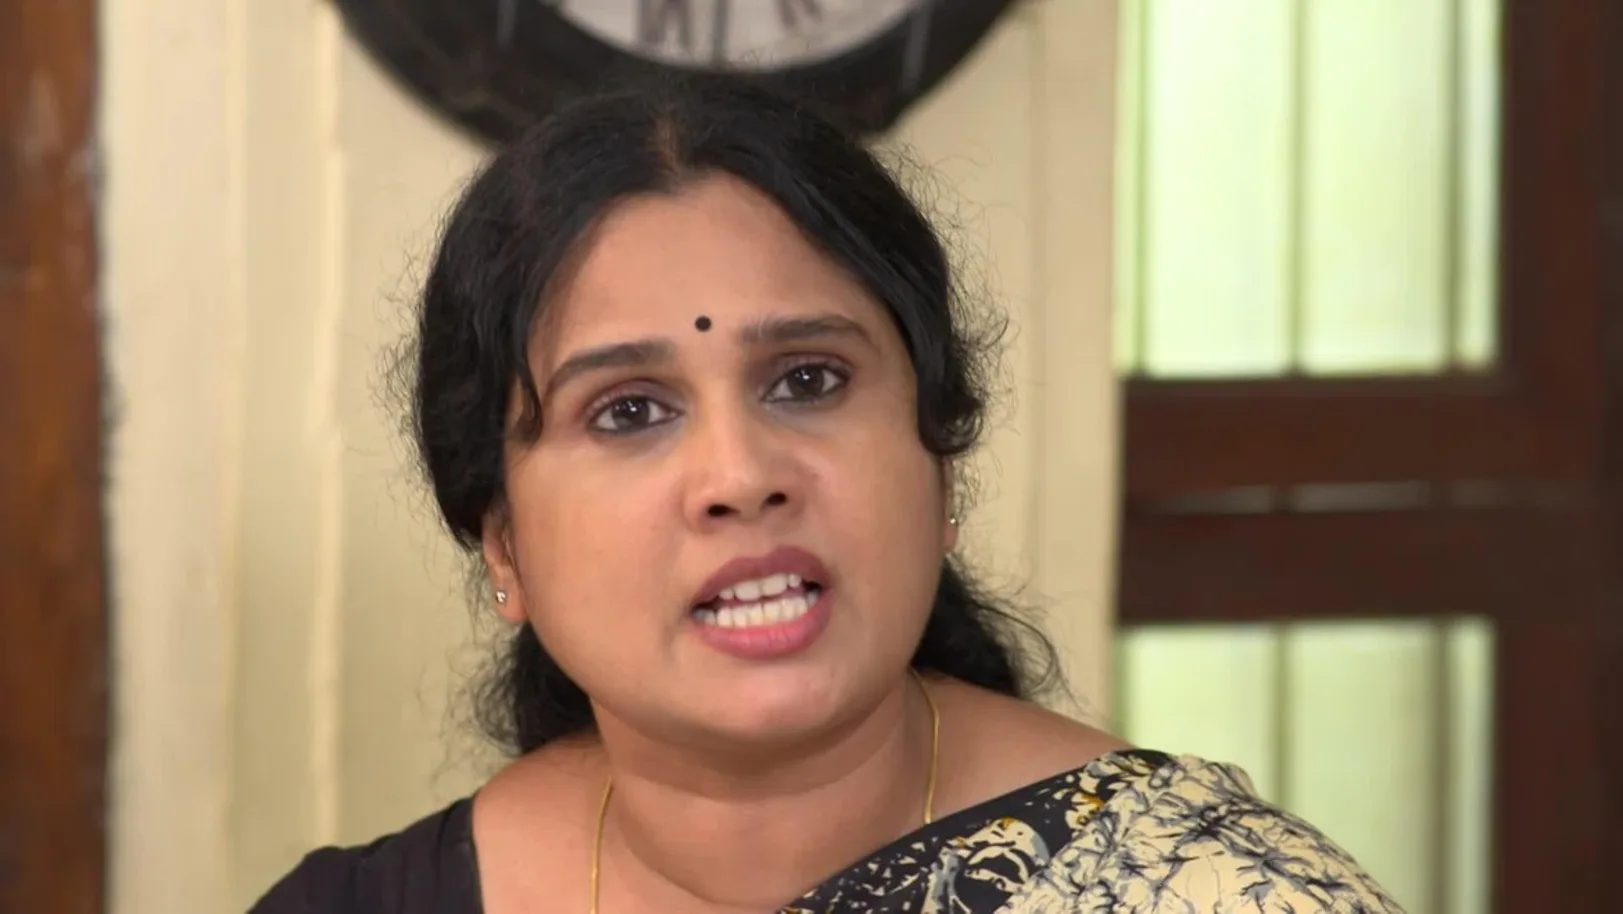 Sathya's mother throws Sathya out of the home - Sathya Highlights 